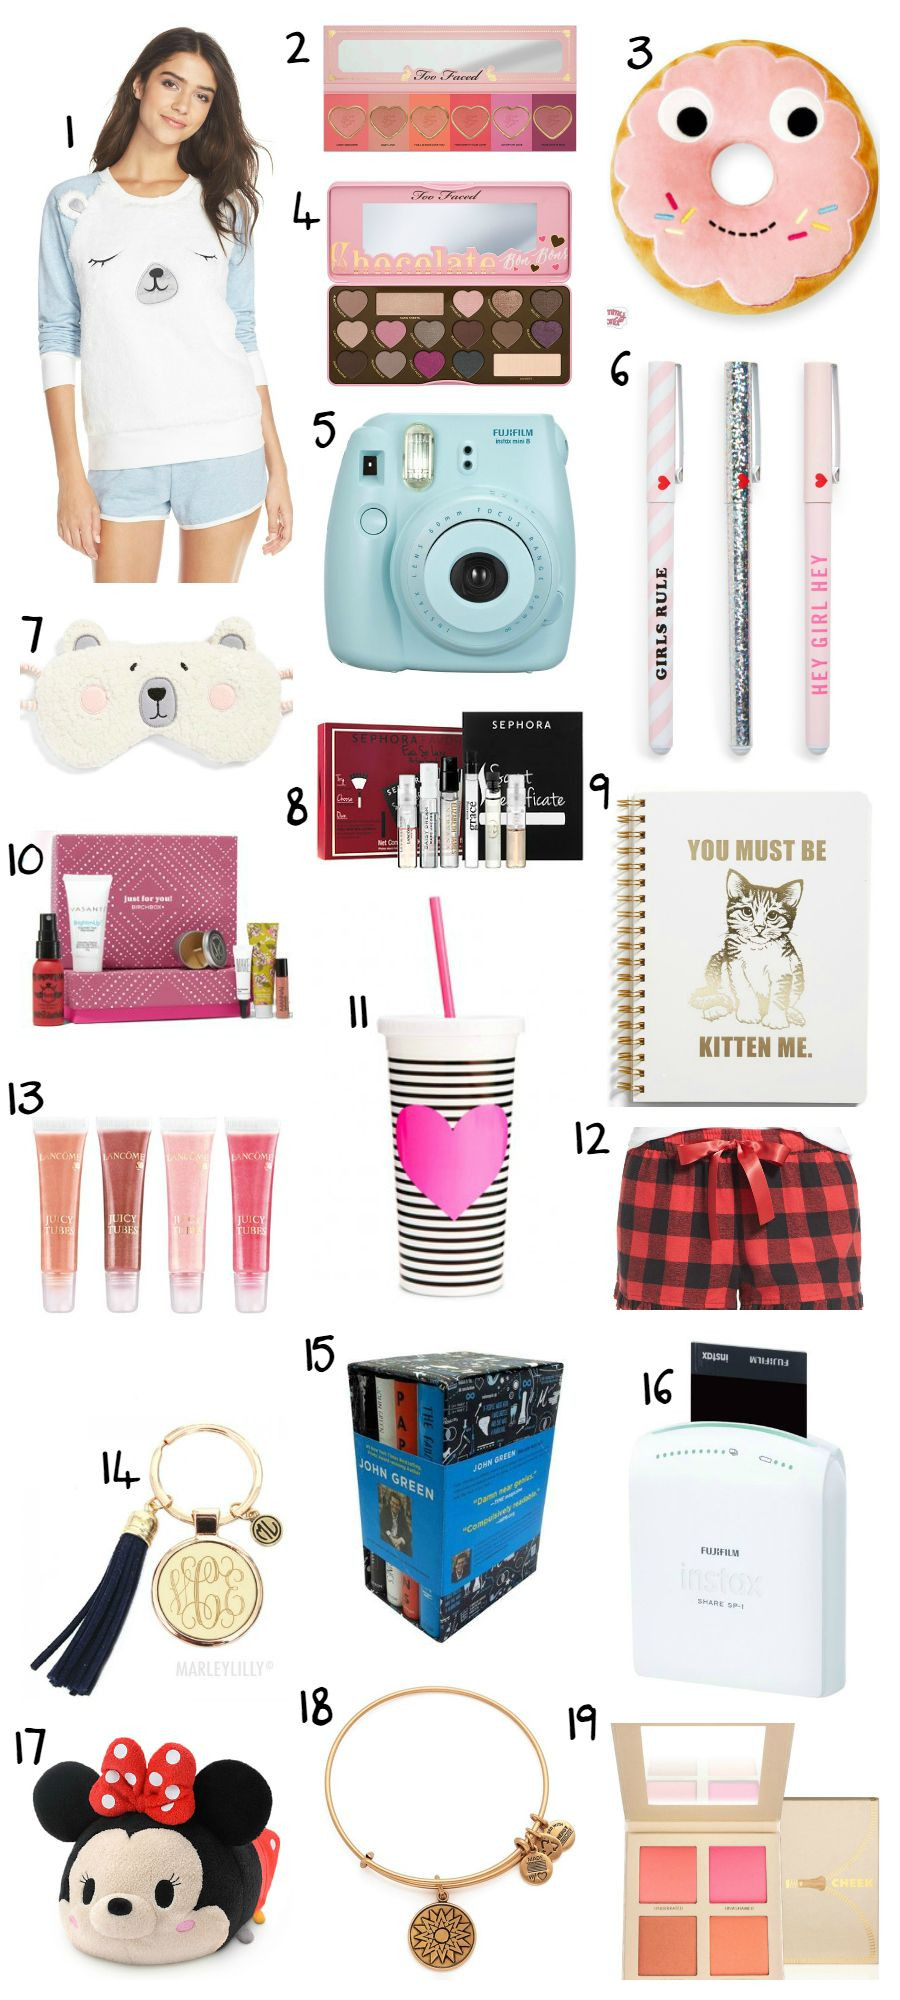 Teenage Gift Ideas For Girls
 The Best Christmas Gift Ideas for Teens